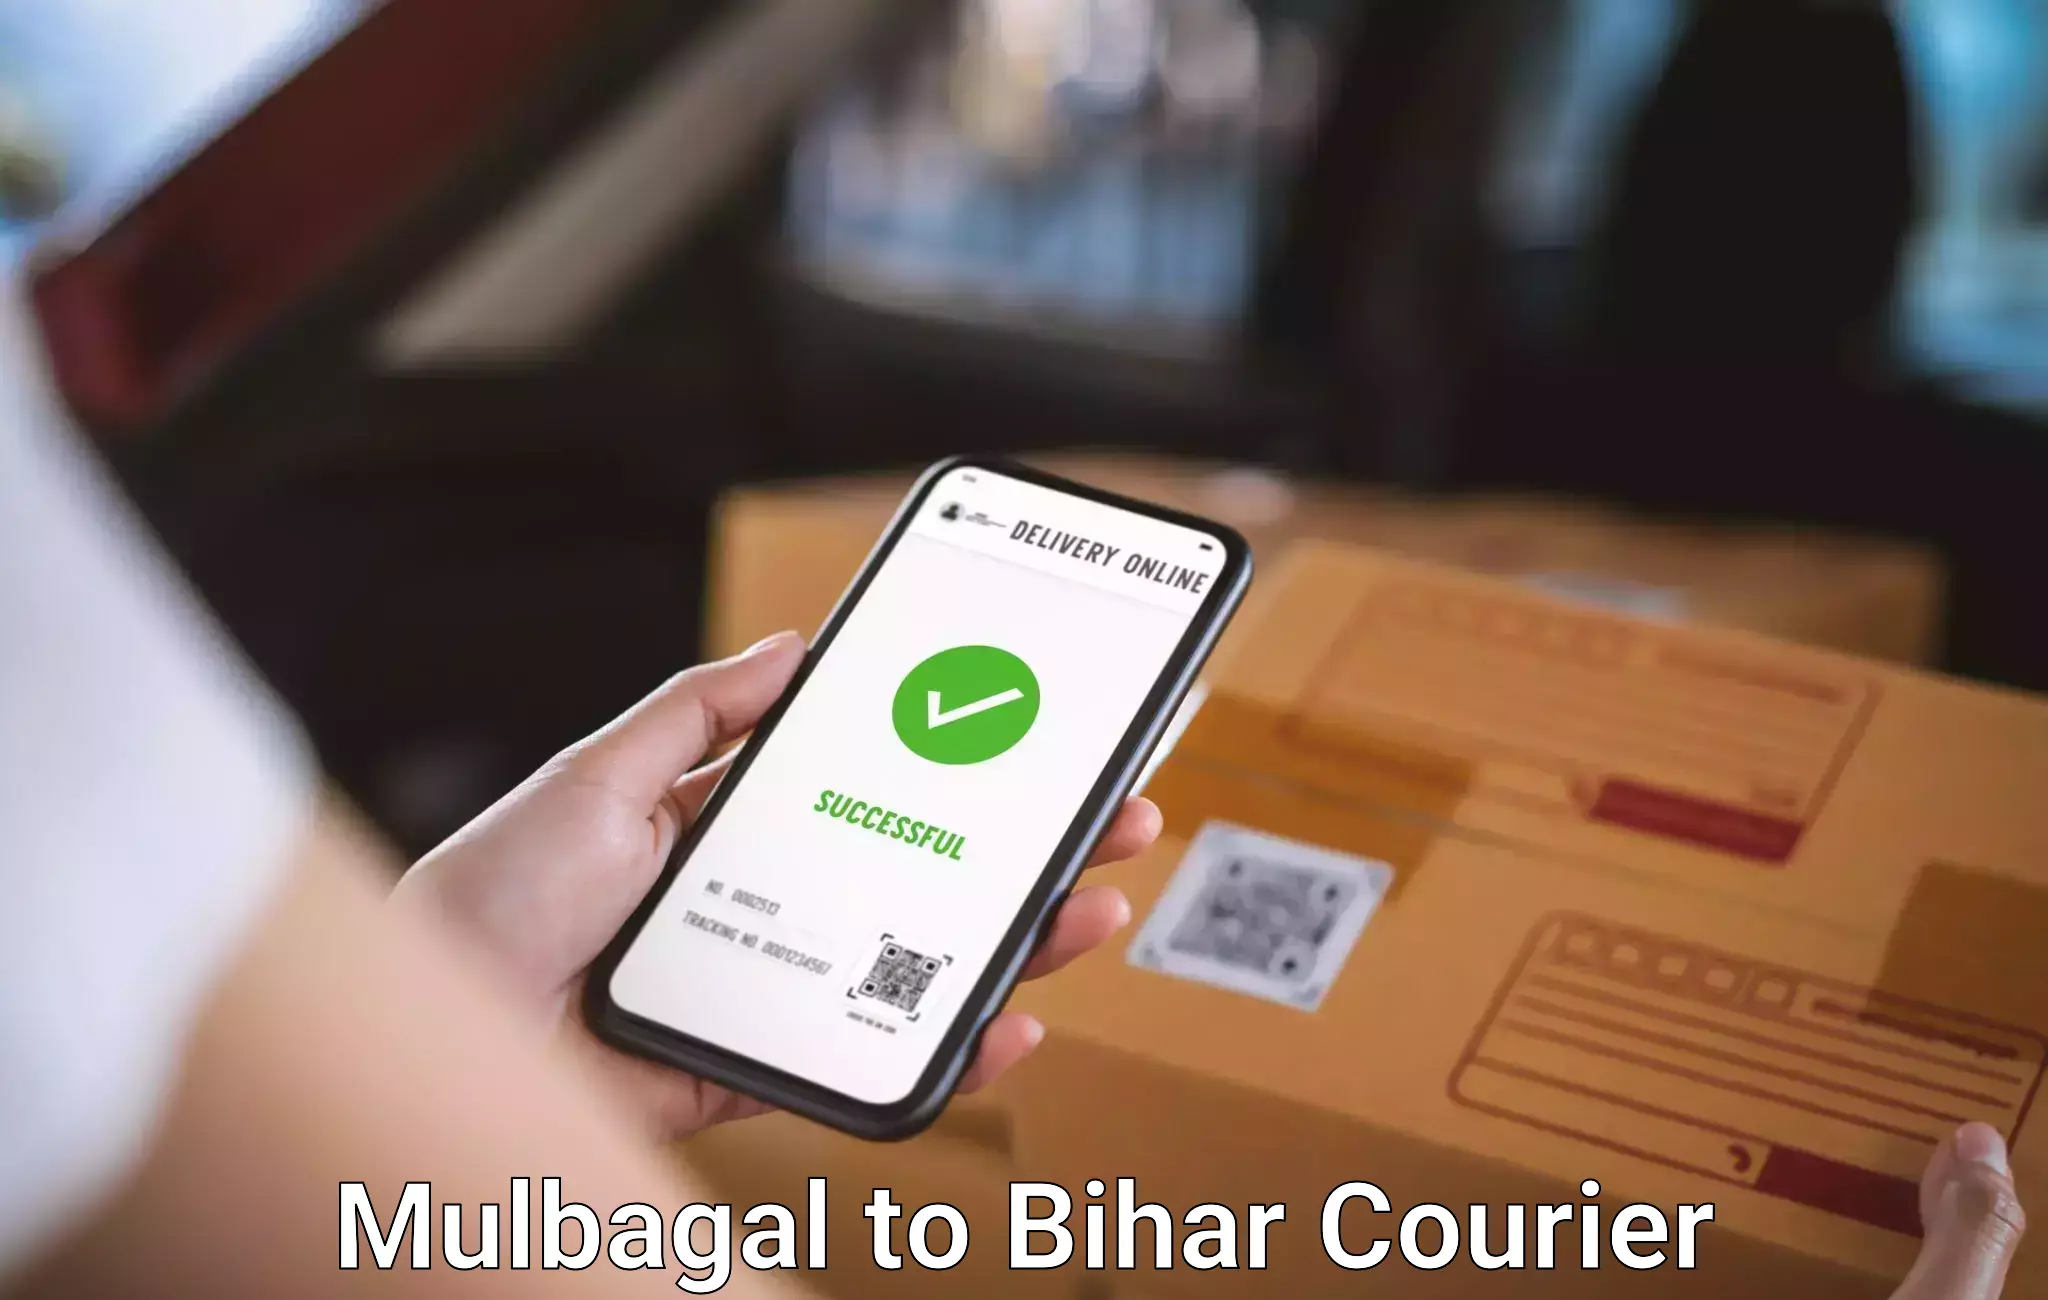 Luggage shipment processing Mulbagal to Bihar